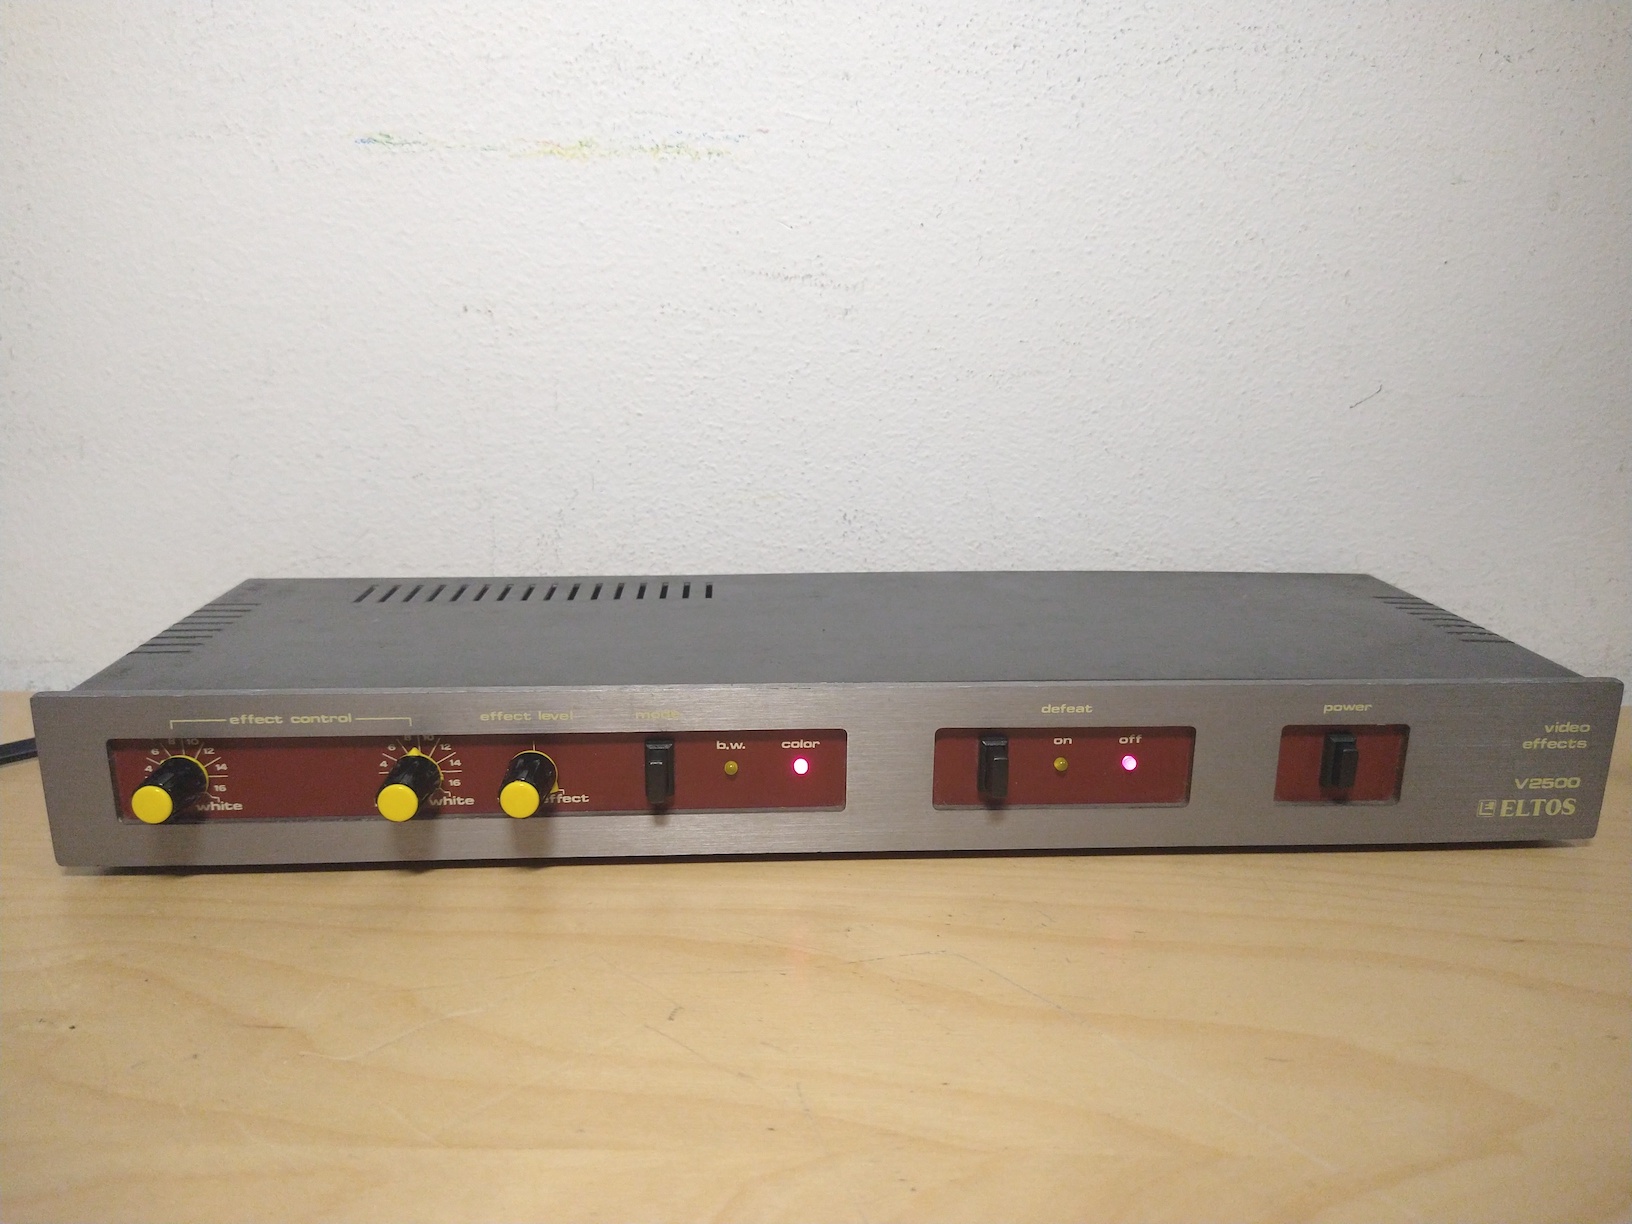 A front view of the Eltos V2500 video effects unit.